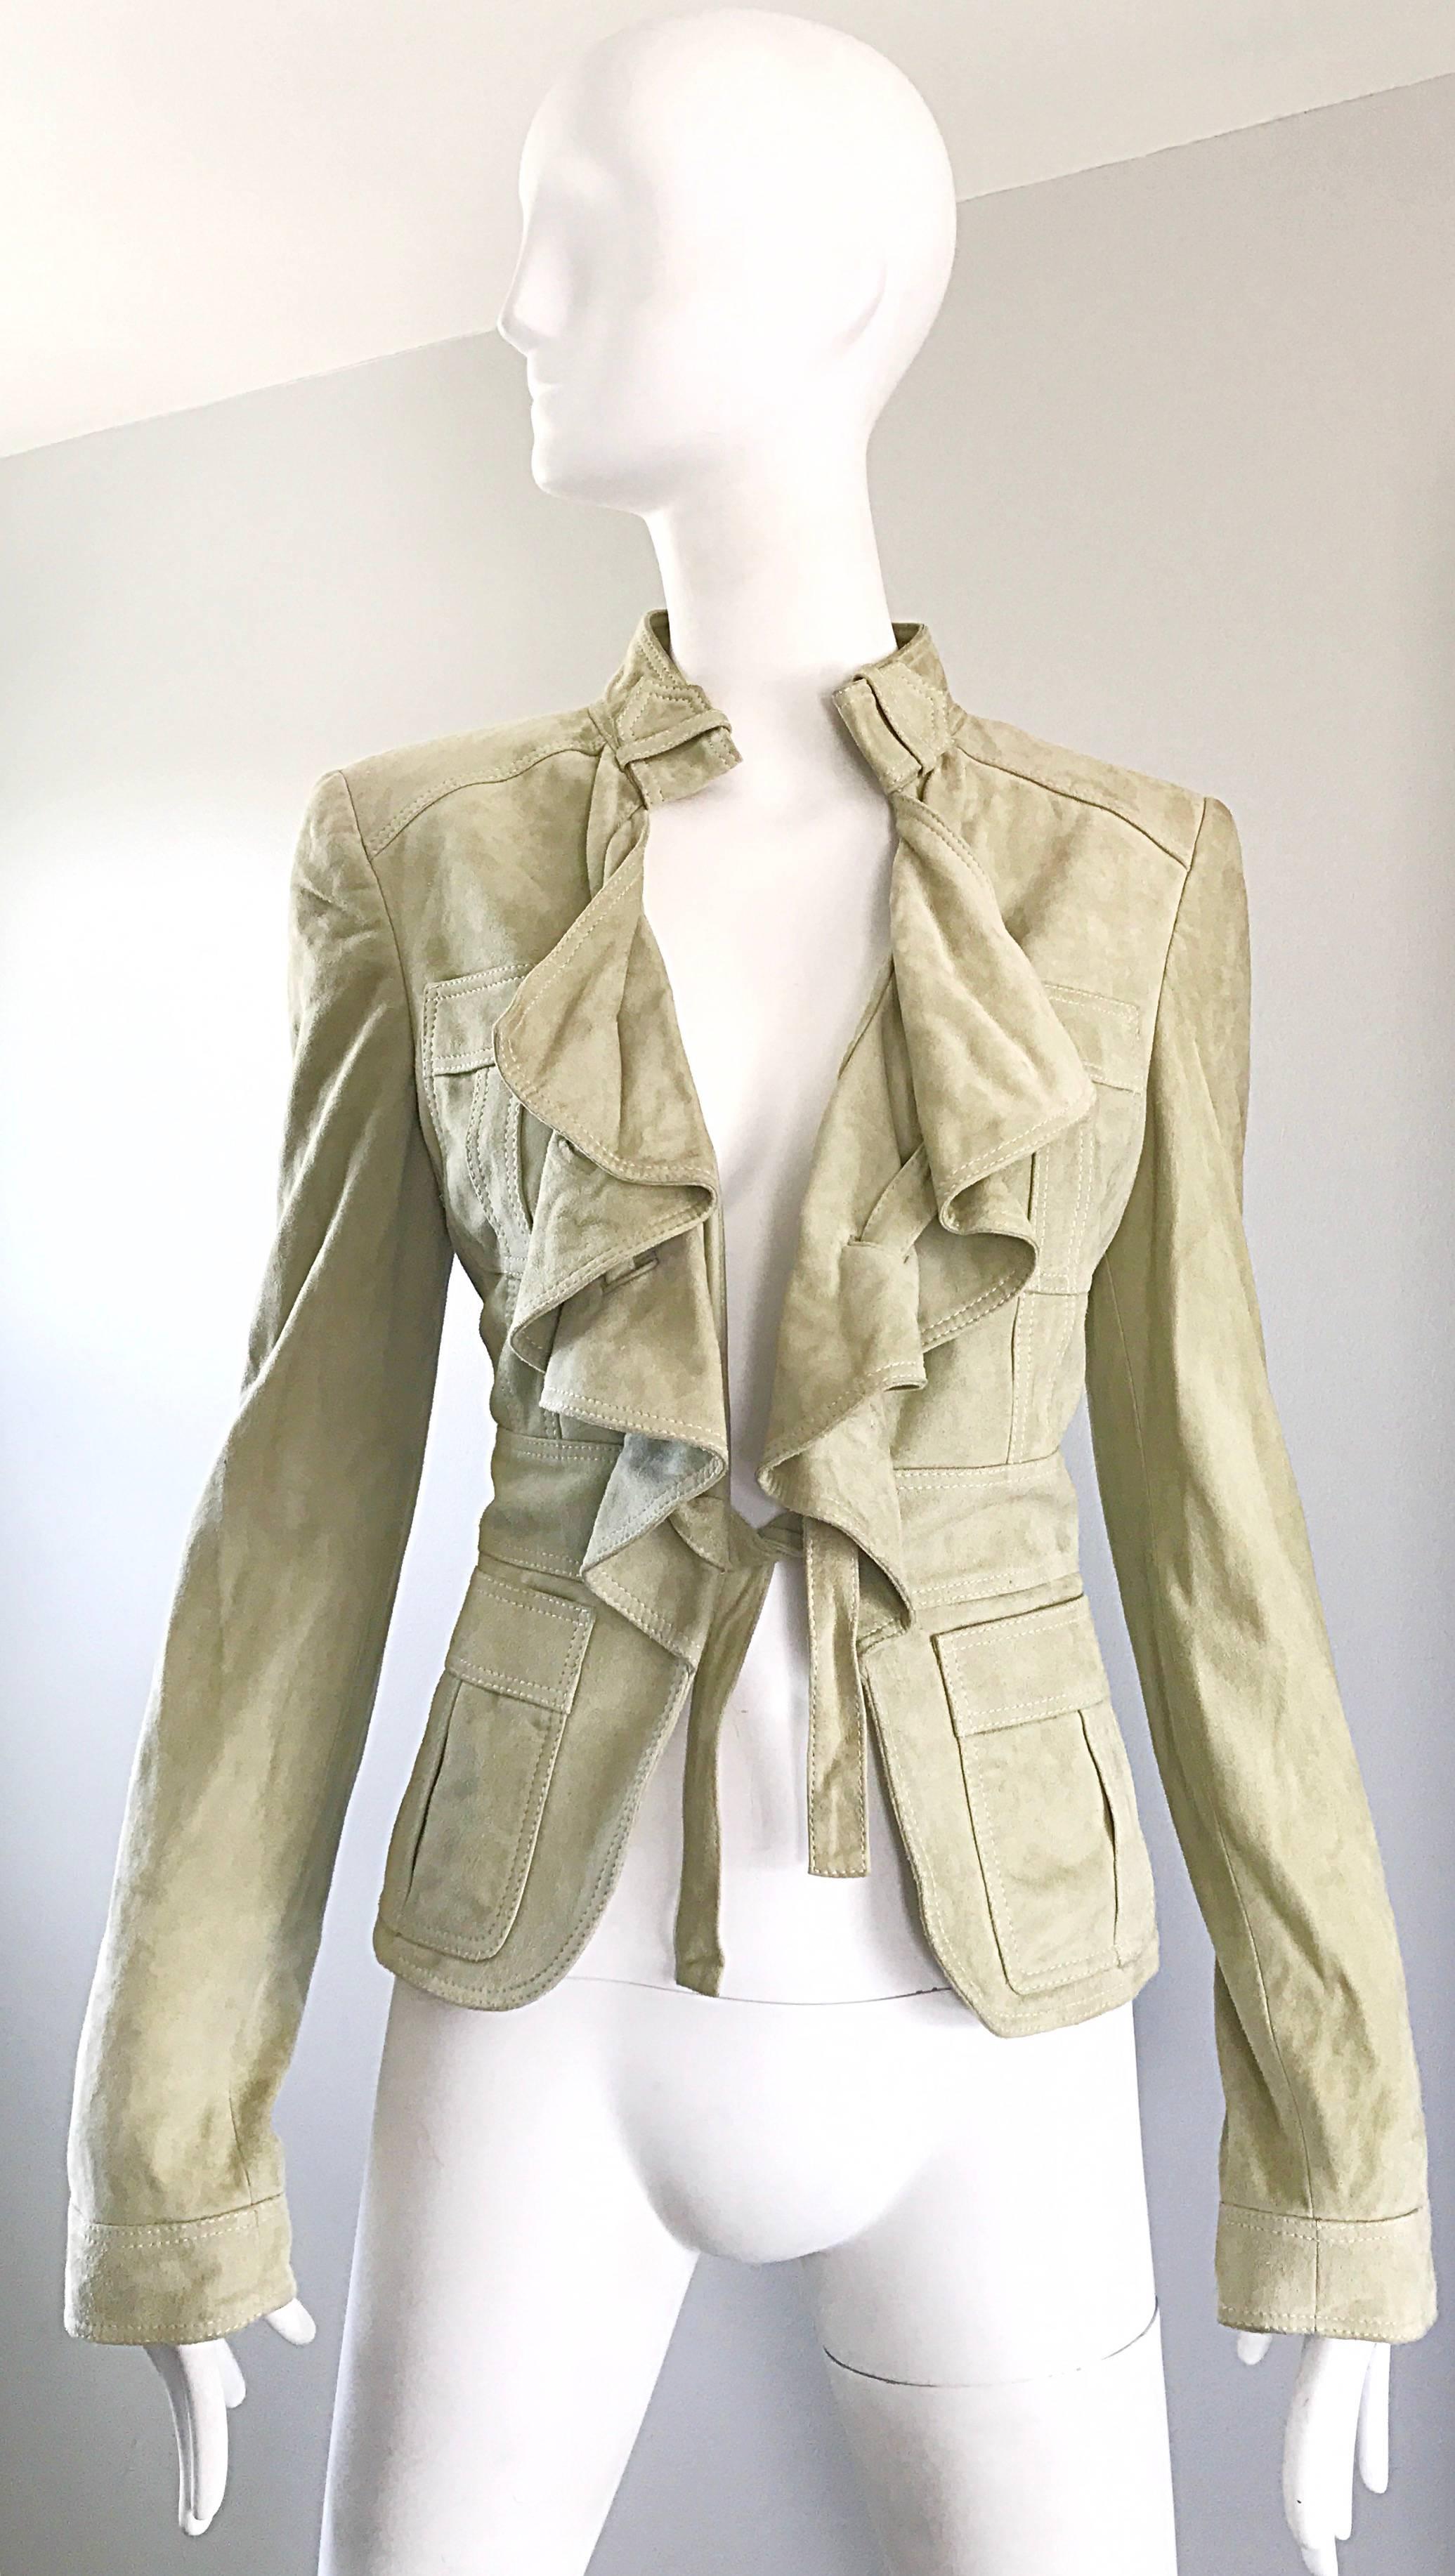 TOM FORD for GUCCI late 90s light pistachio khaki suede leather ruffle moto jacket! Intricate detail, with no attention to design spared! Features ruffle down the front bodice, with a suede tie at waist. Pockets at each side of the waist and each